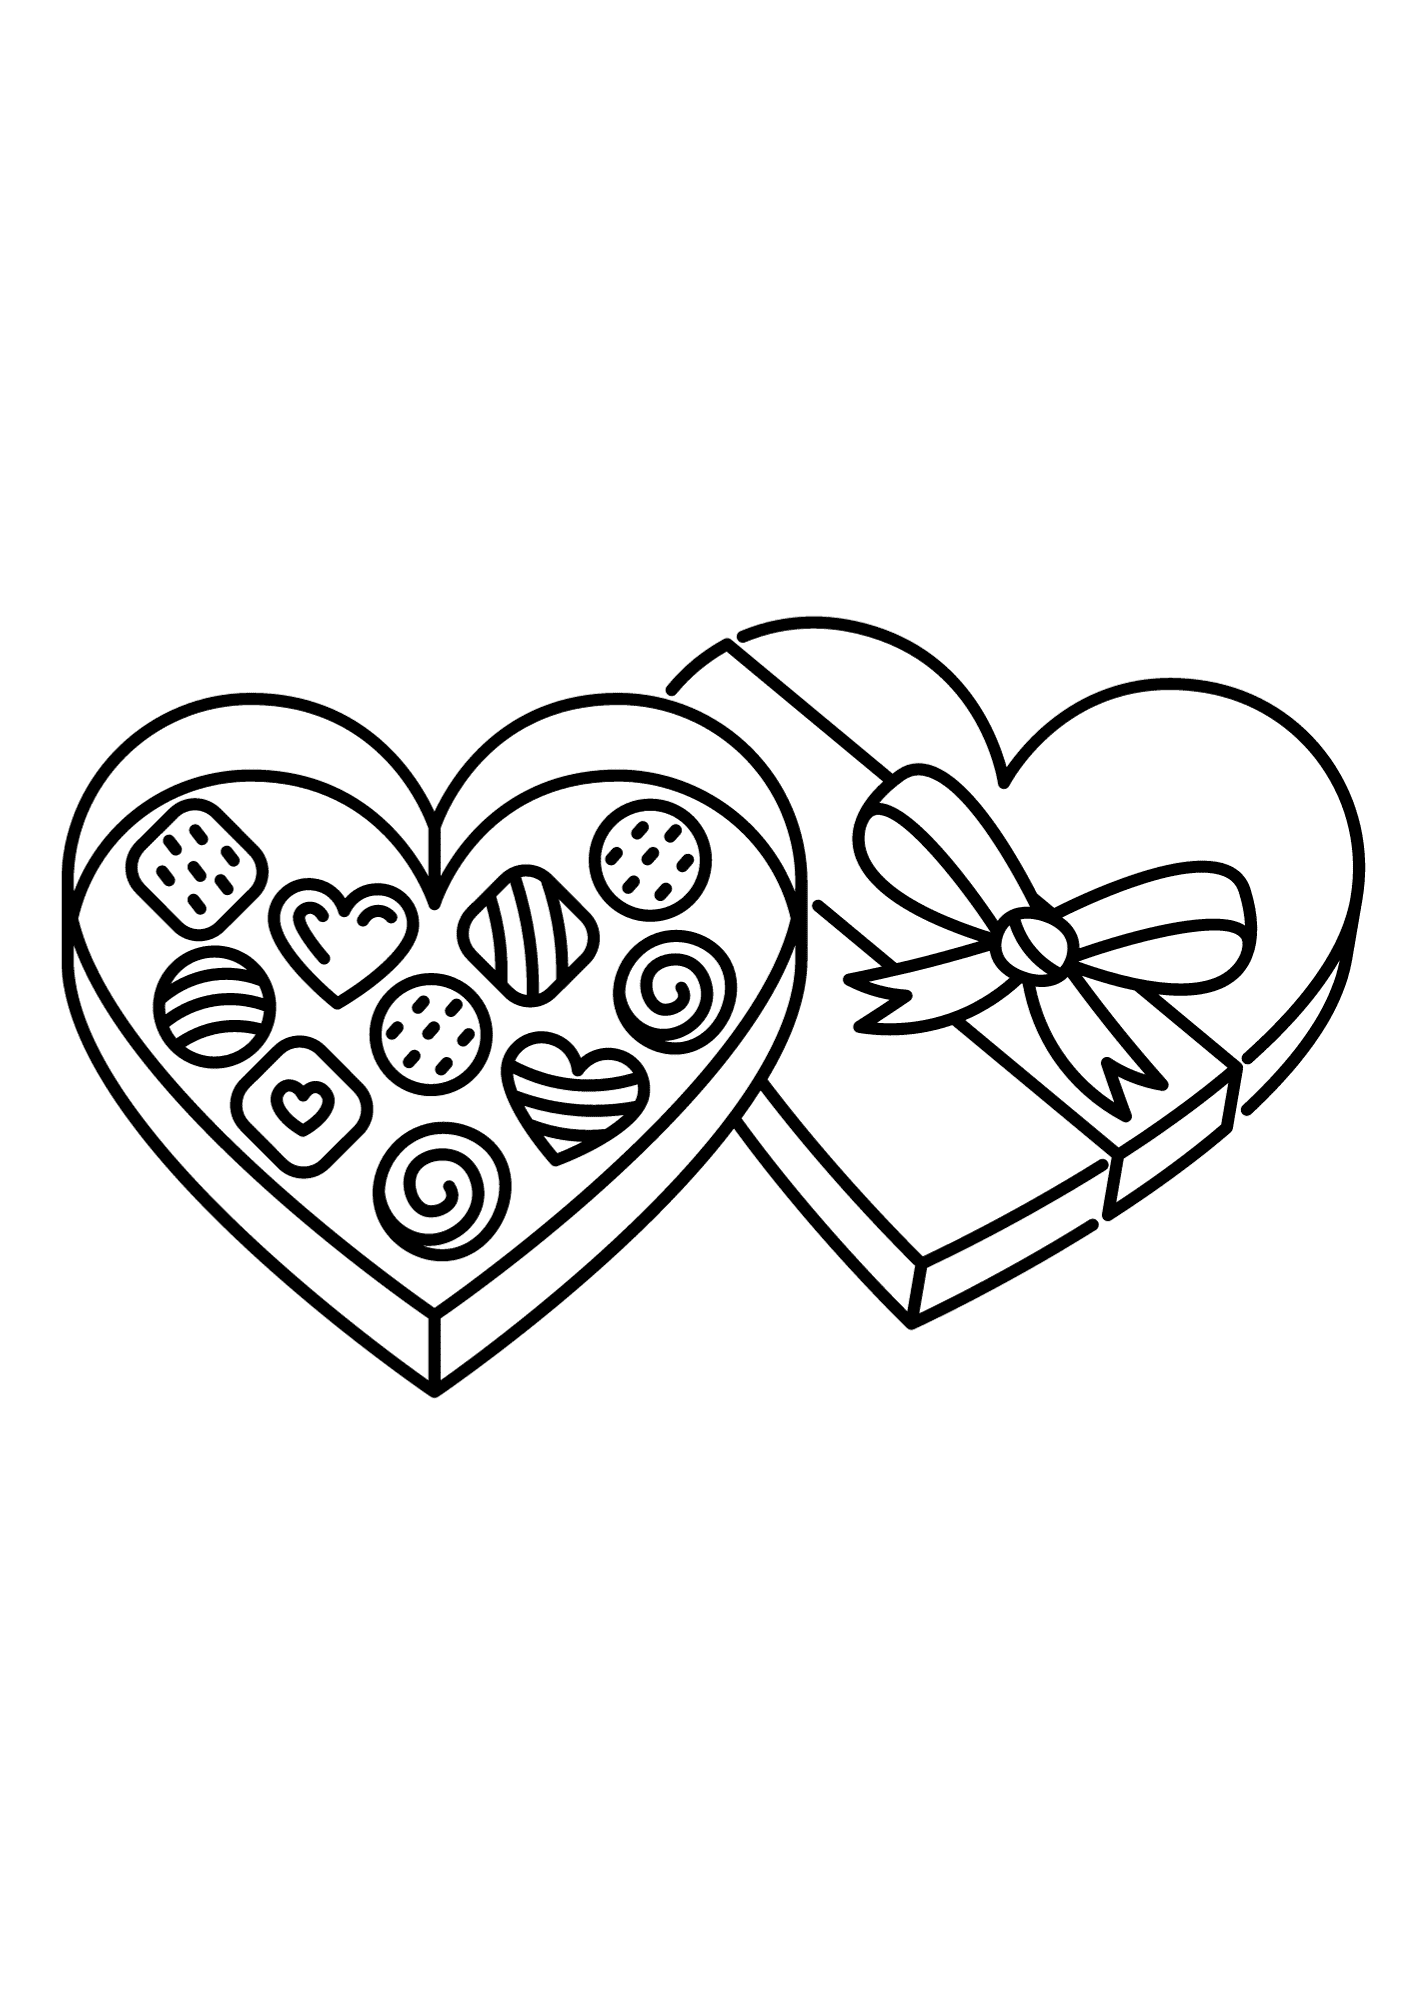 Chocolate Of Valentin's Day Coloring Page